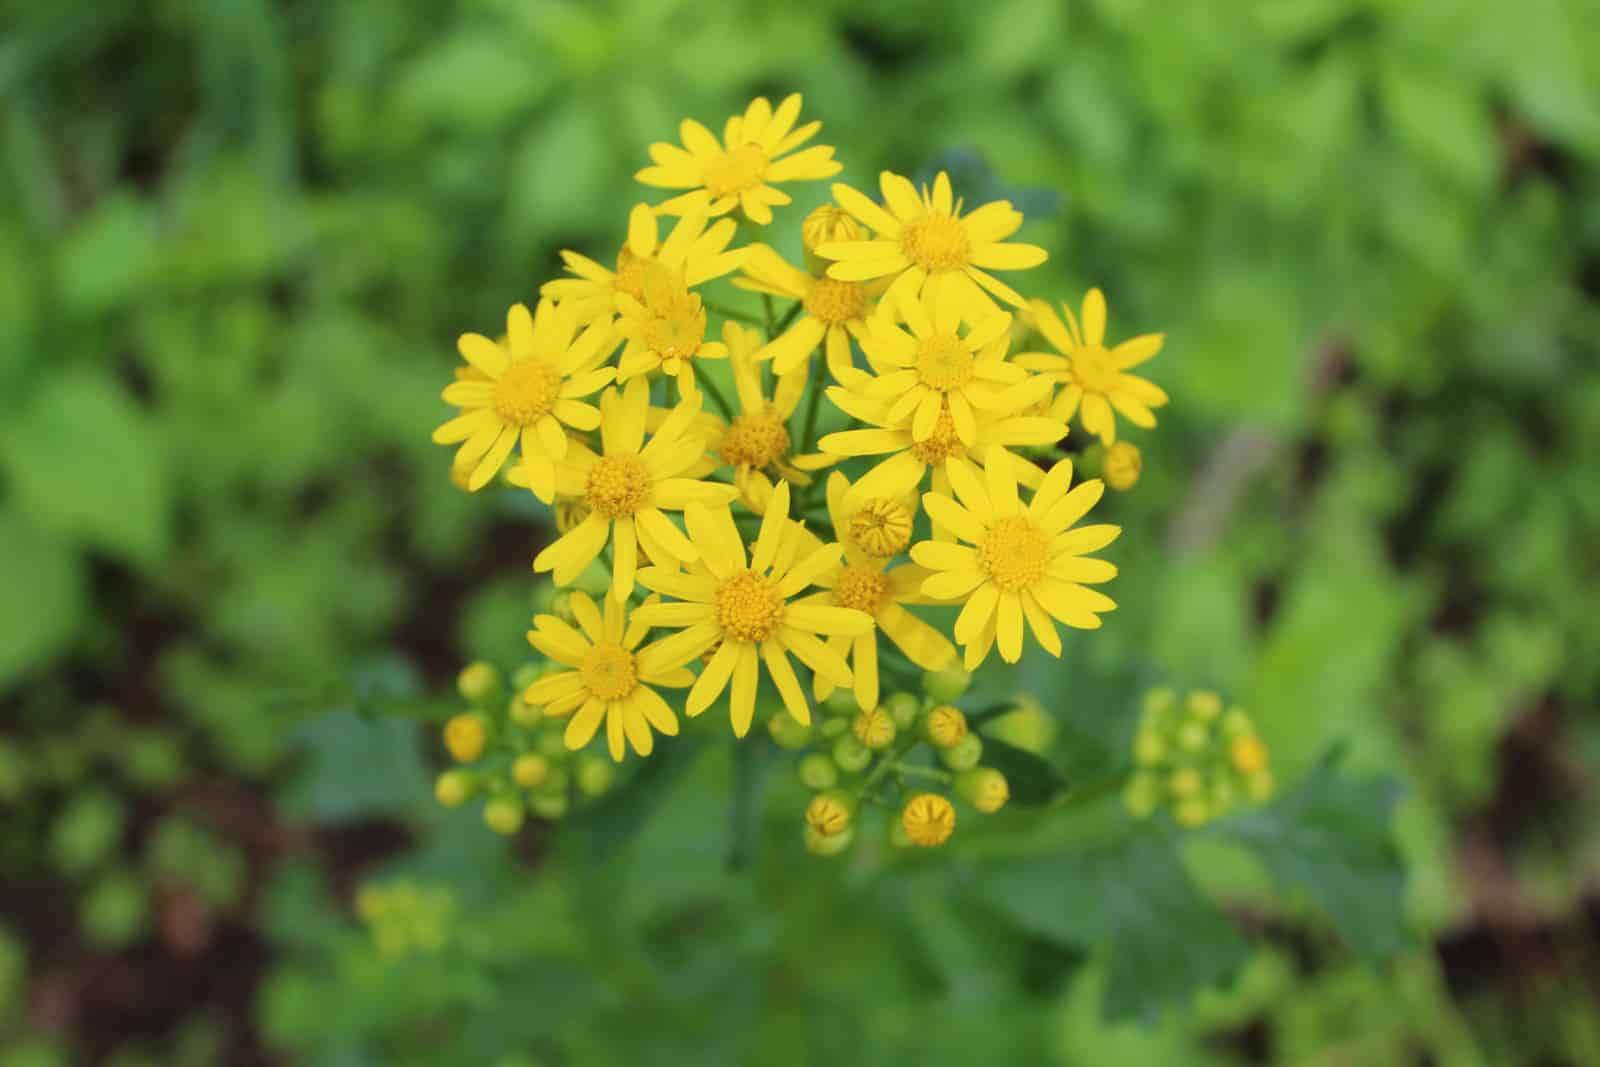 Cluster of butterweed blooms